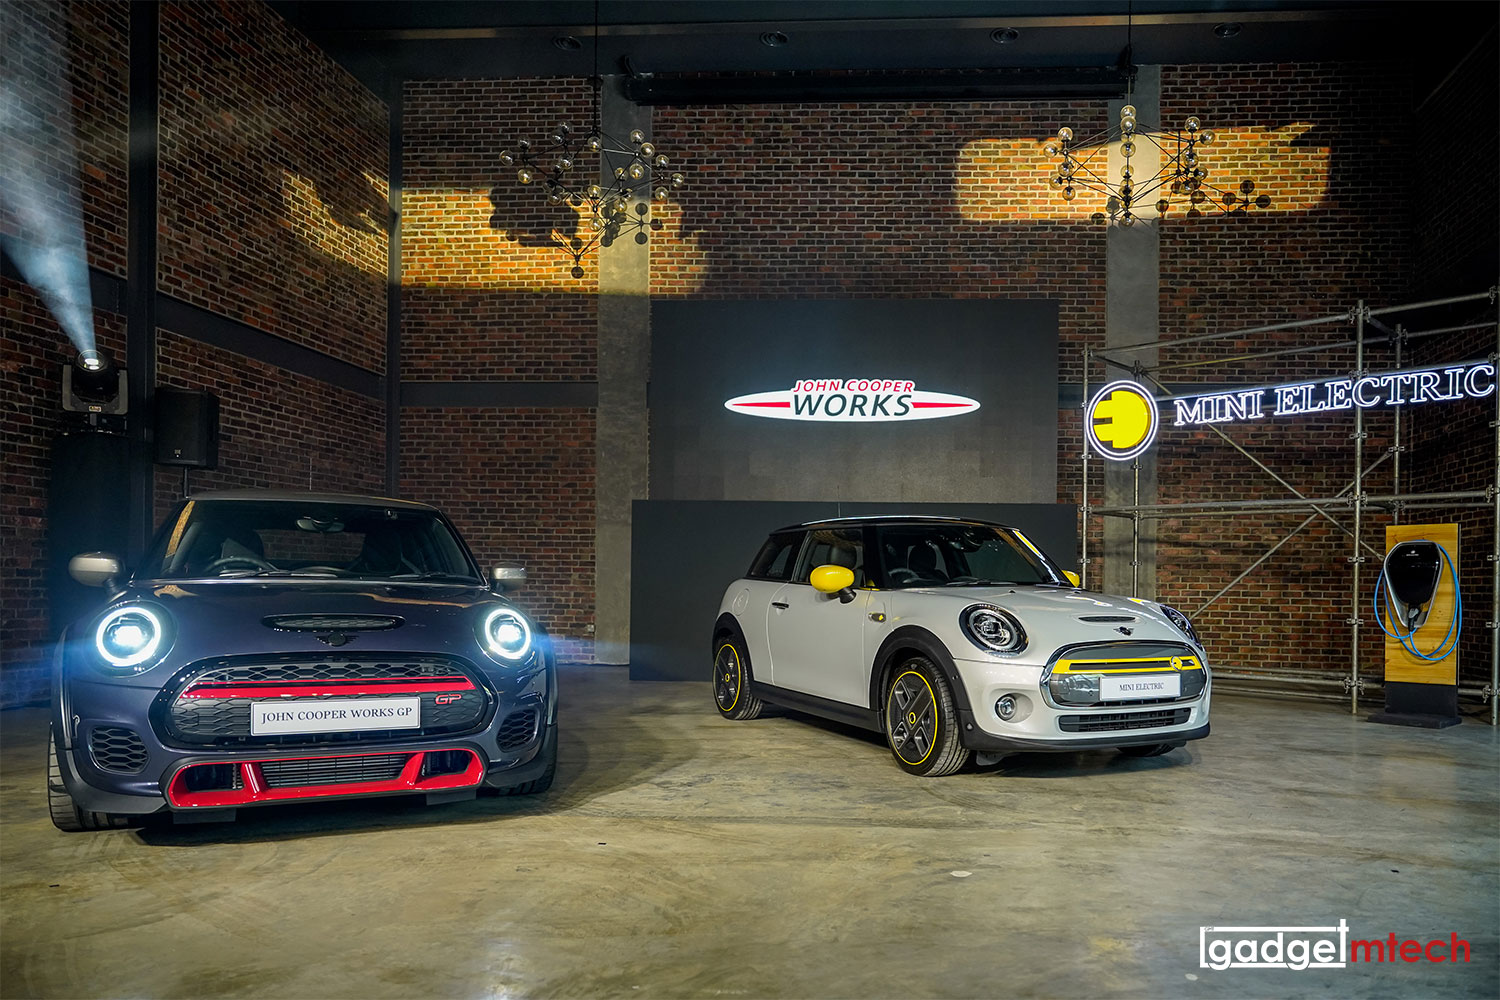 2020 MINI John Cooper Works GP and MINI Cooper SE Officially Launched